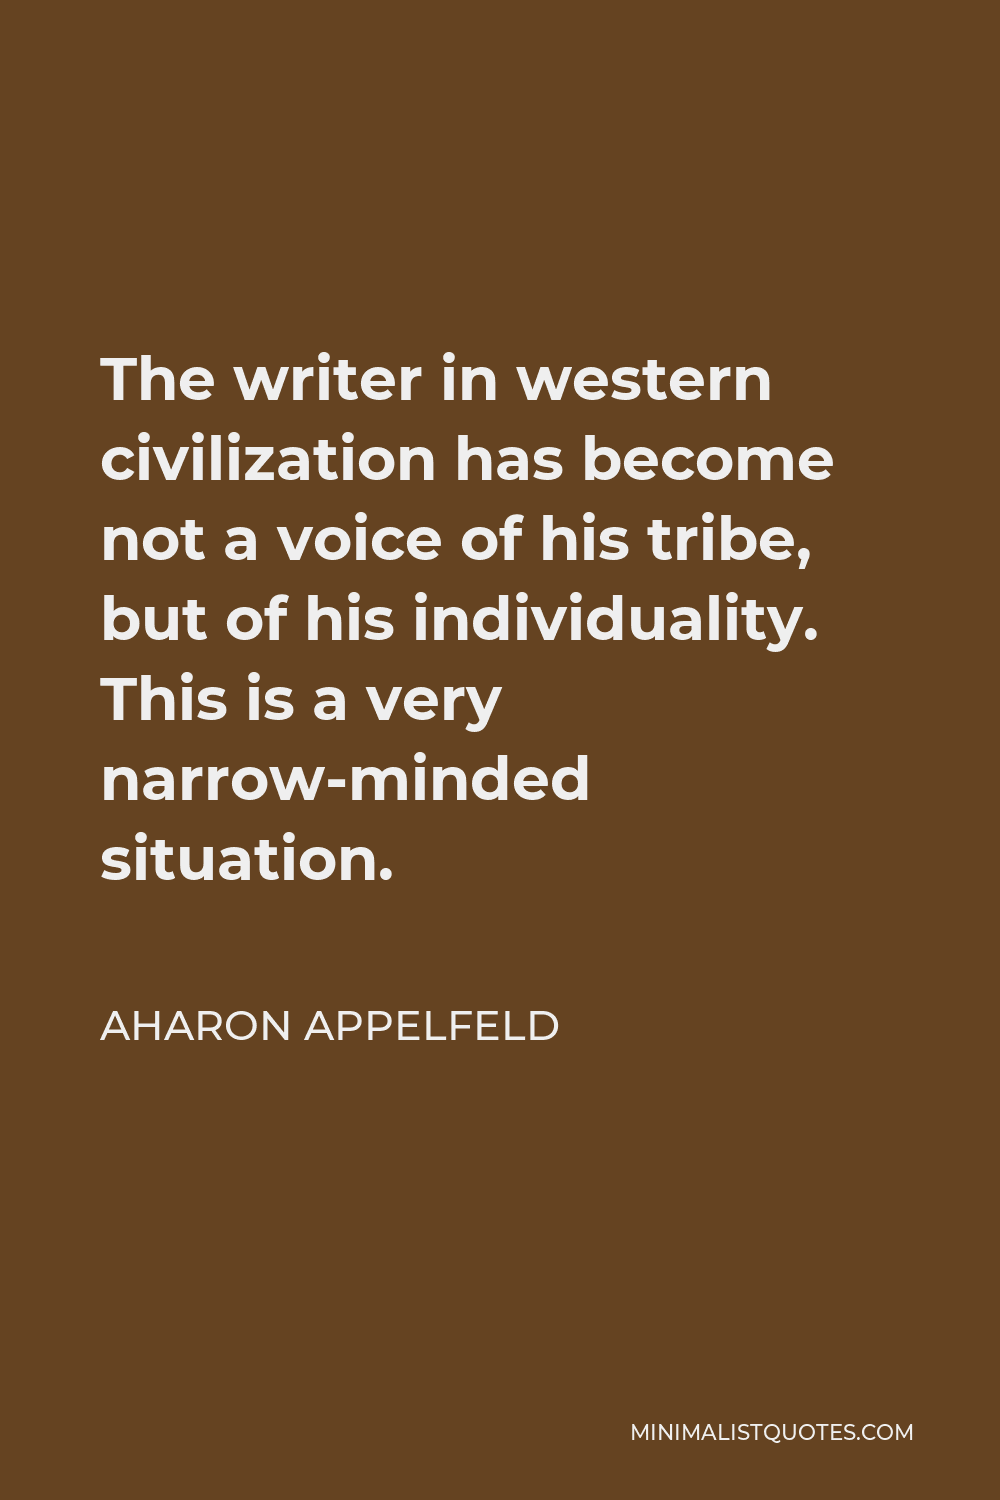 Aharon Appelfeld Quote - The writer in western civilization has become not a voice of his tribe, but of his individuality. This is a very narrow-minded situation.